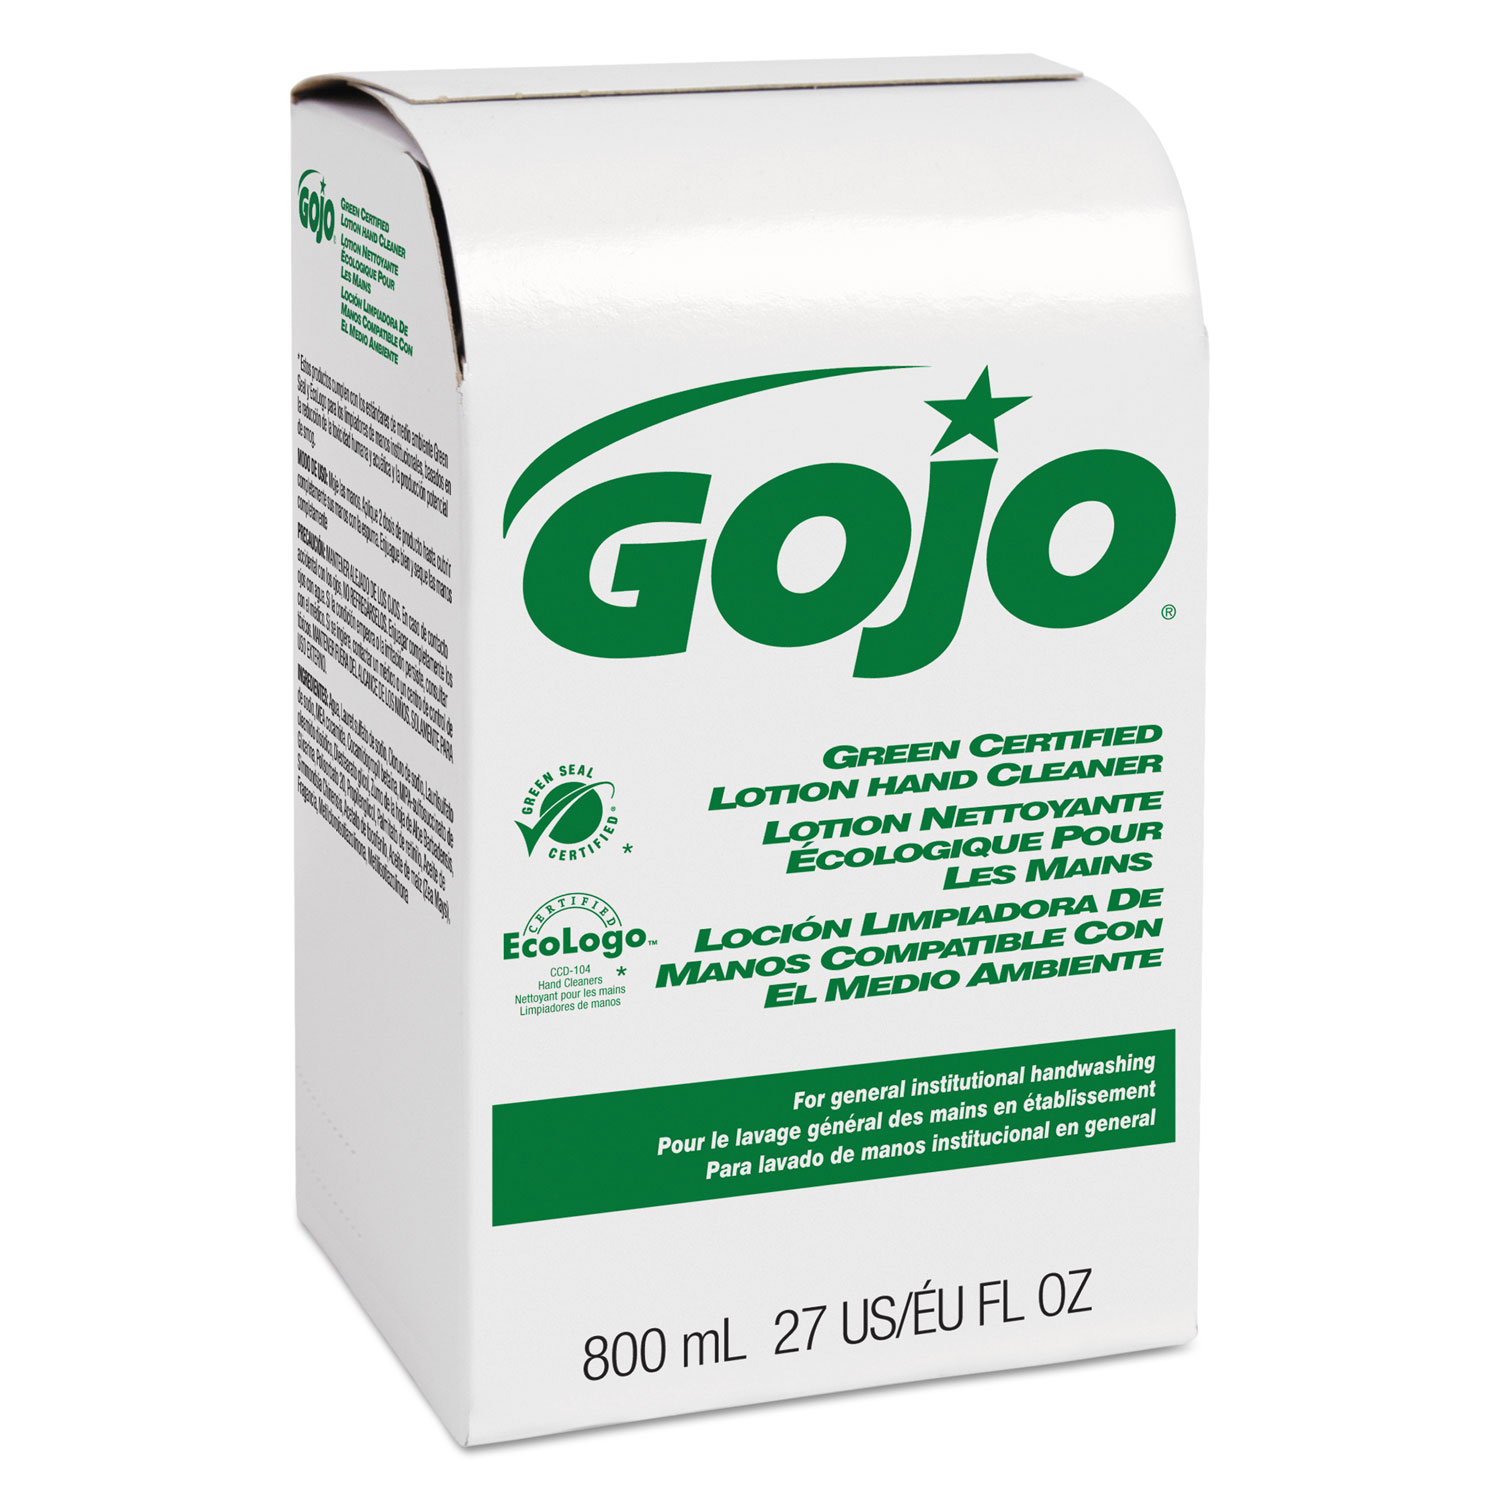  GOJO 9165-12 Green Certified Lotion Hand Cleaner 800mL Bag-in-Box Refill, Light Floral Scent, Refill (GOJ916512EA) 